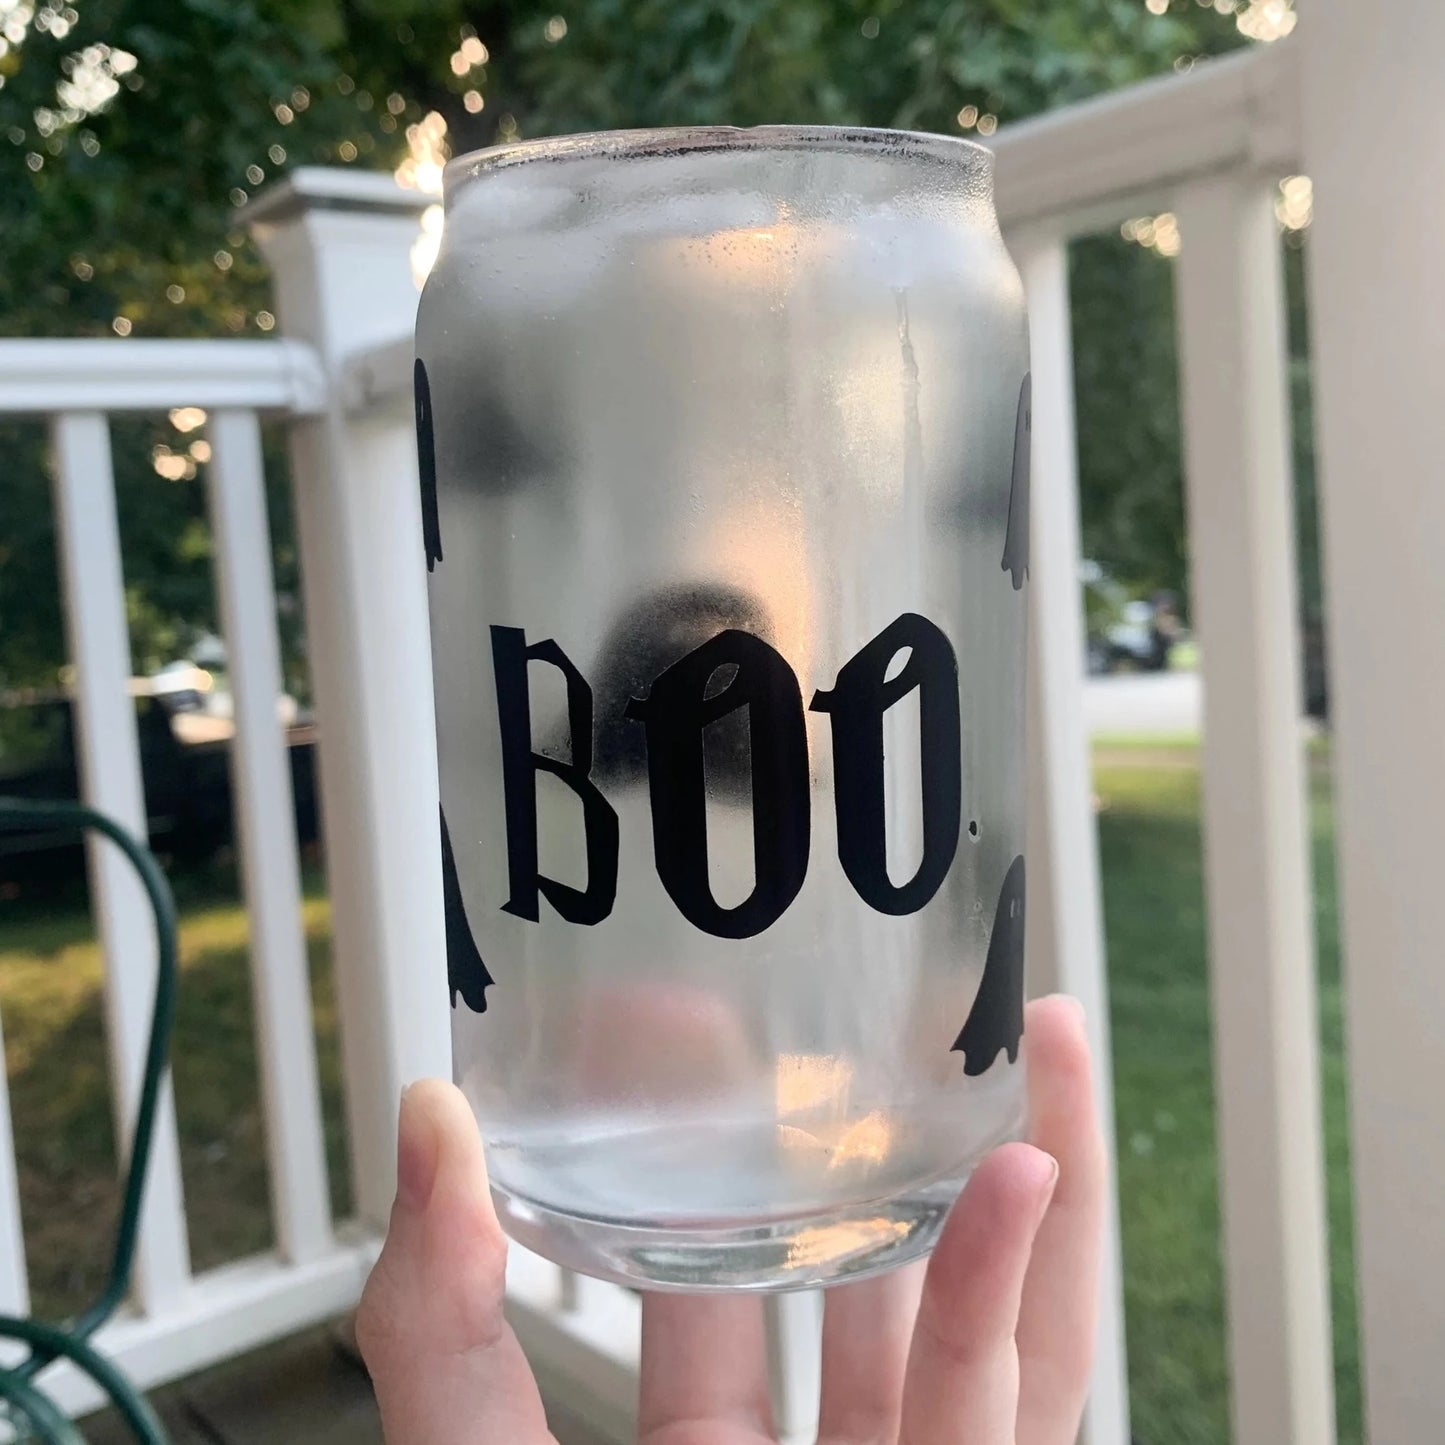 Hand holding boo ghost glass can filled with ice cold water.